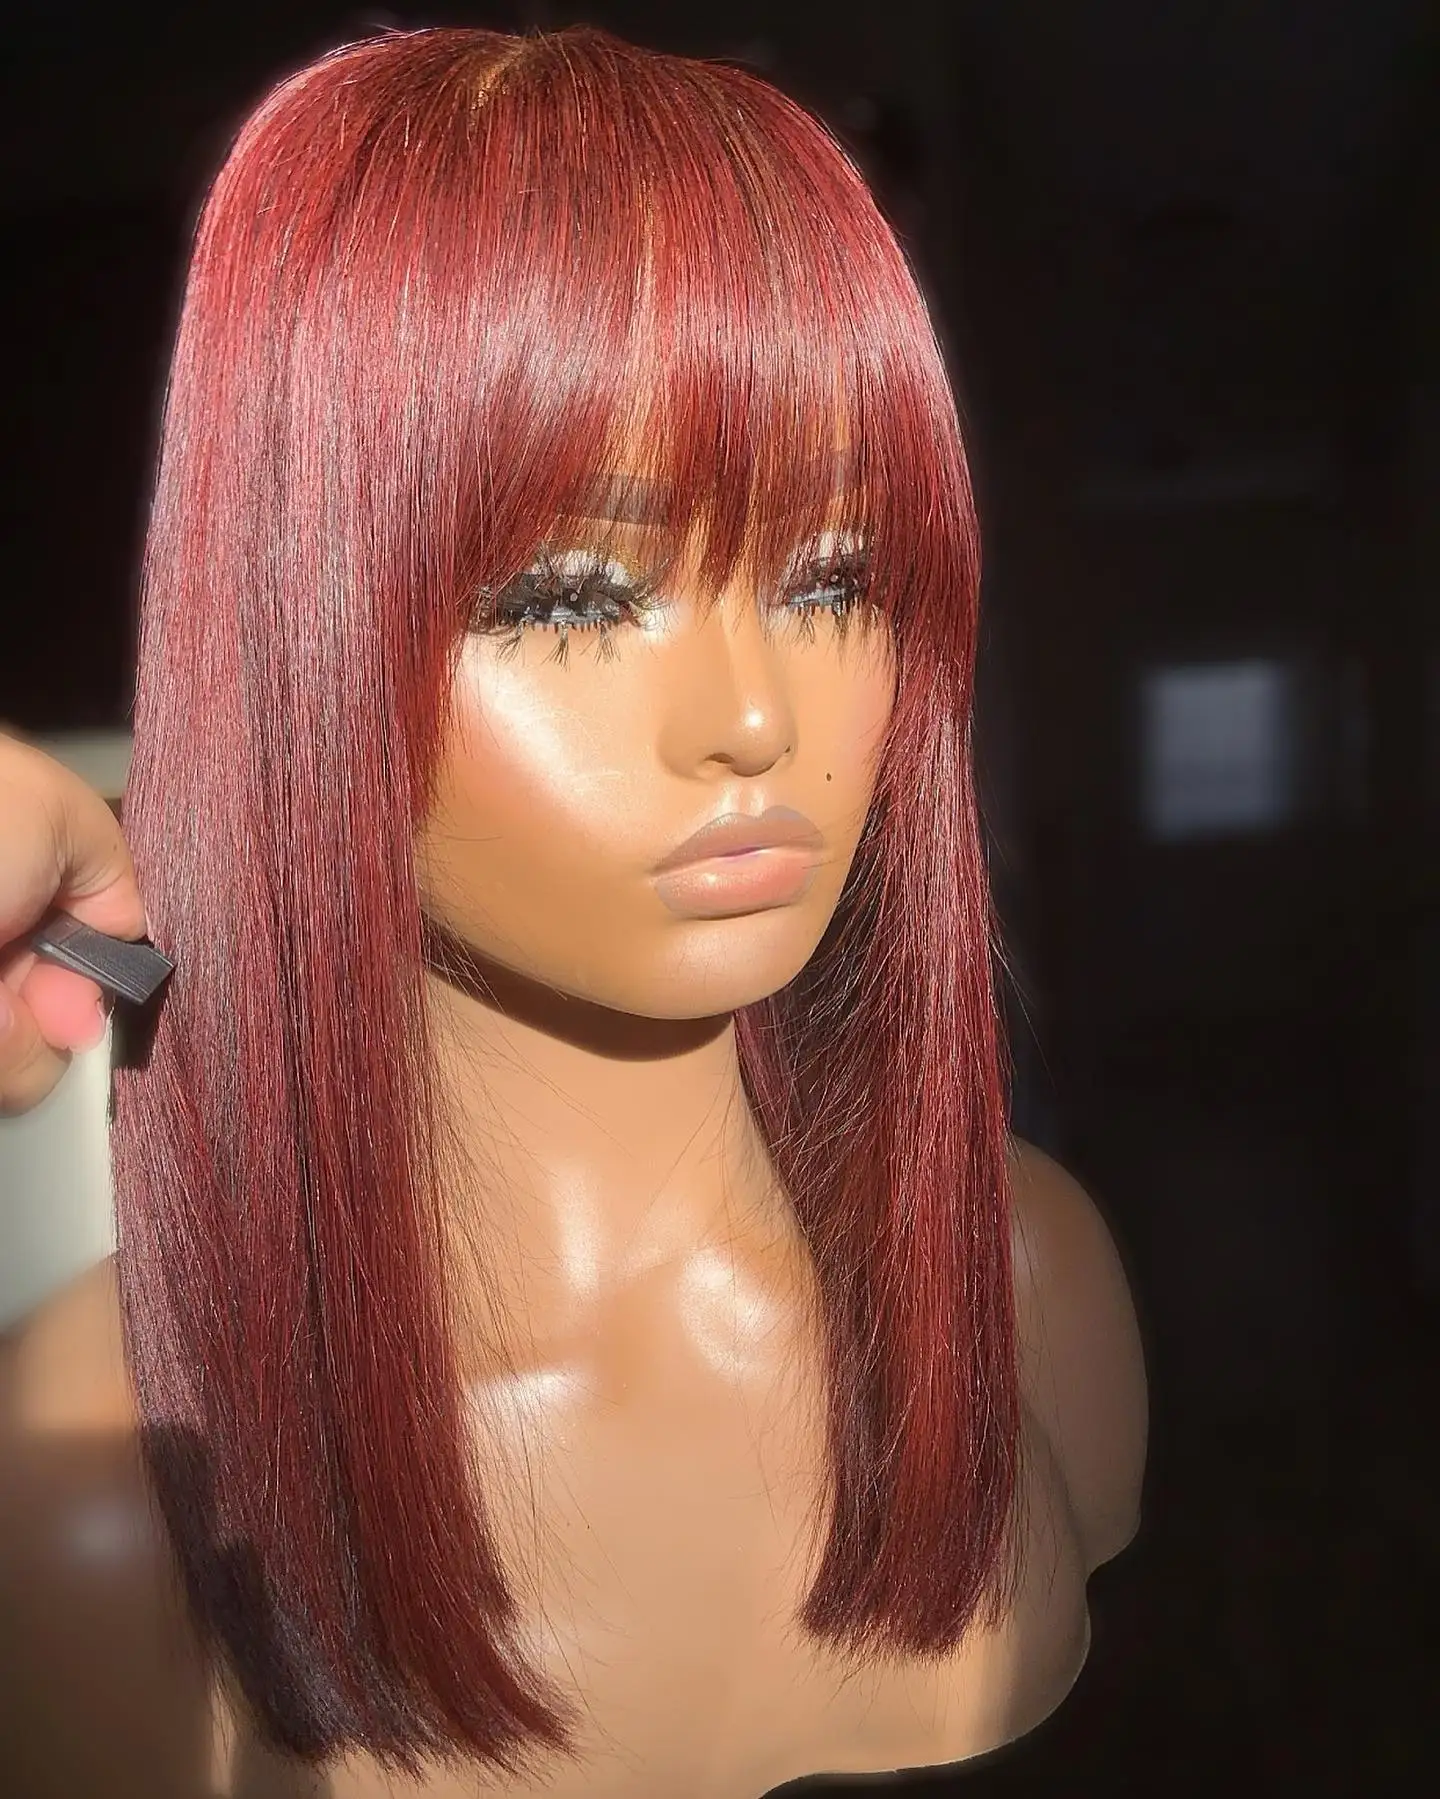 

99J Burgundy Red Short Human Hair Wig with Fringe for Women Straight Remy Hair Bob Wigs With Bangs Dark Brown Balayage Color